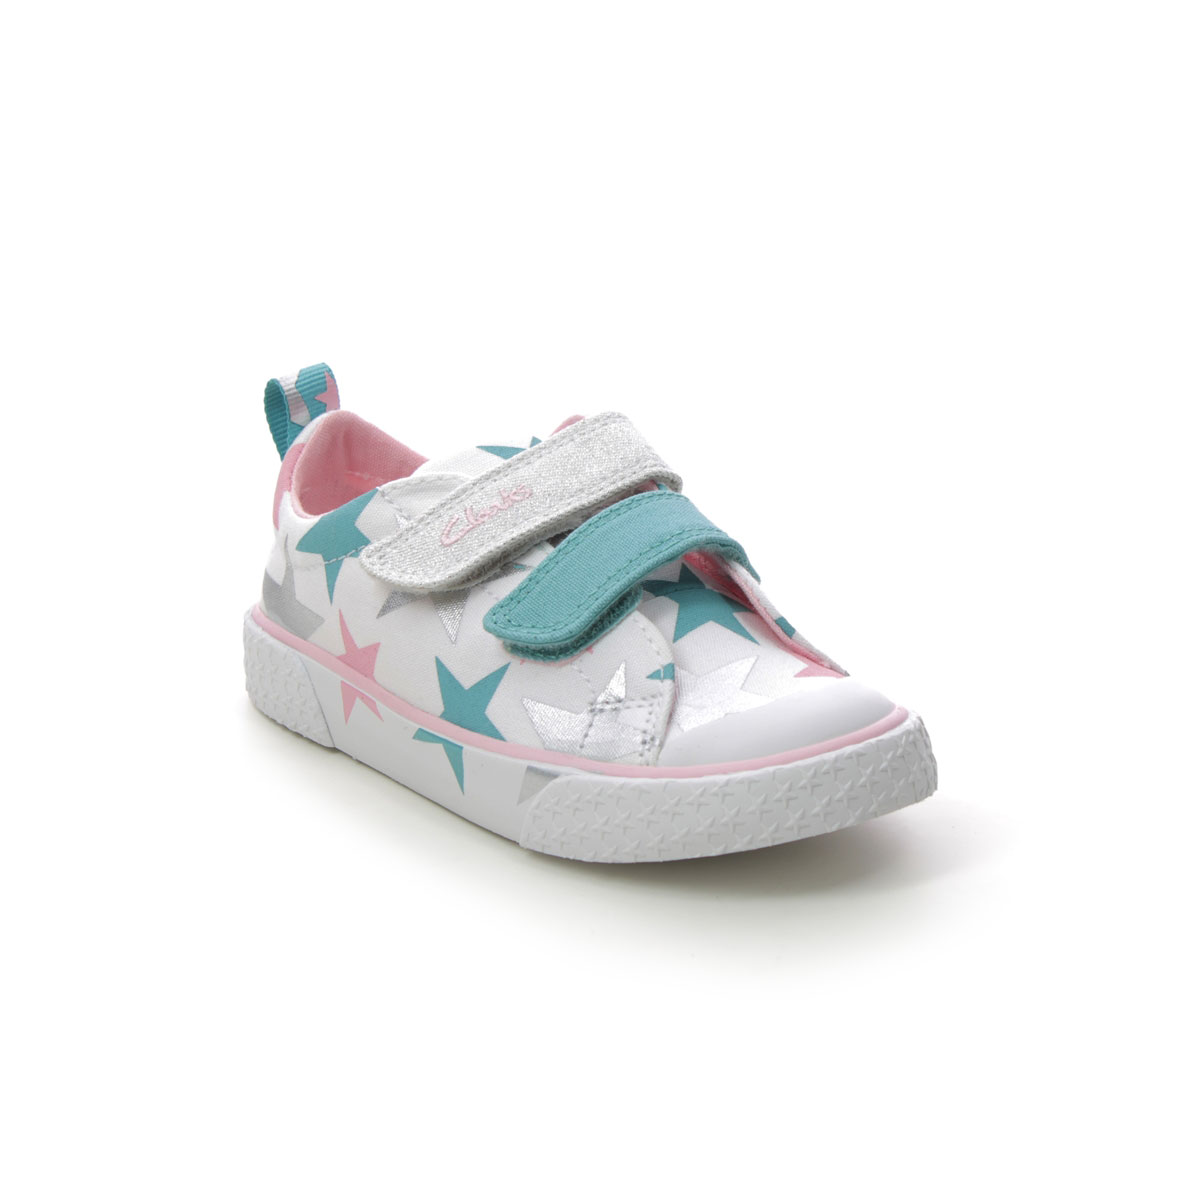 Clarks Foxing Lo K Cotton Kids toddler girls trainers 6635-46F in a Plain Canvas in Size 7